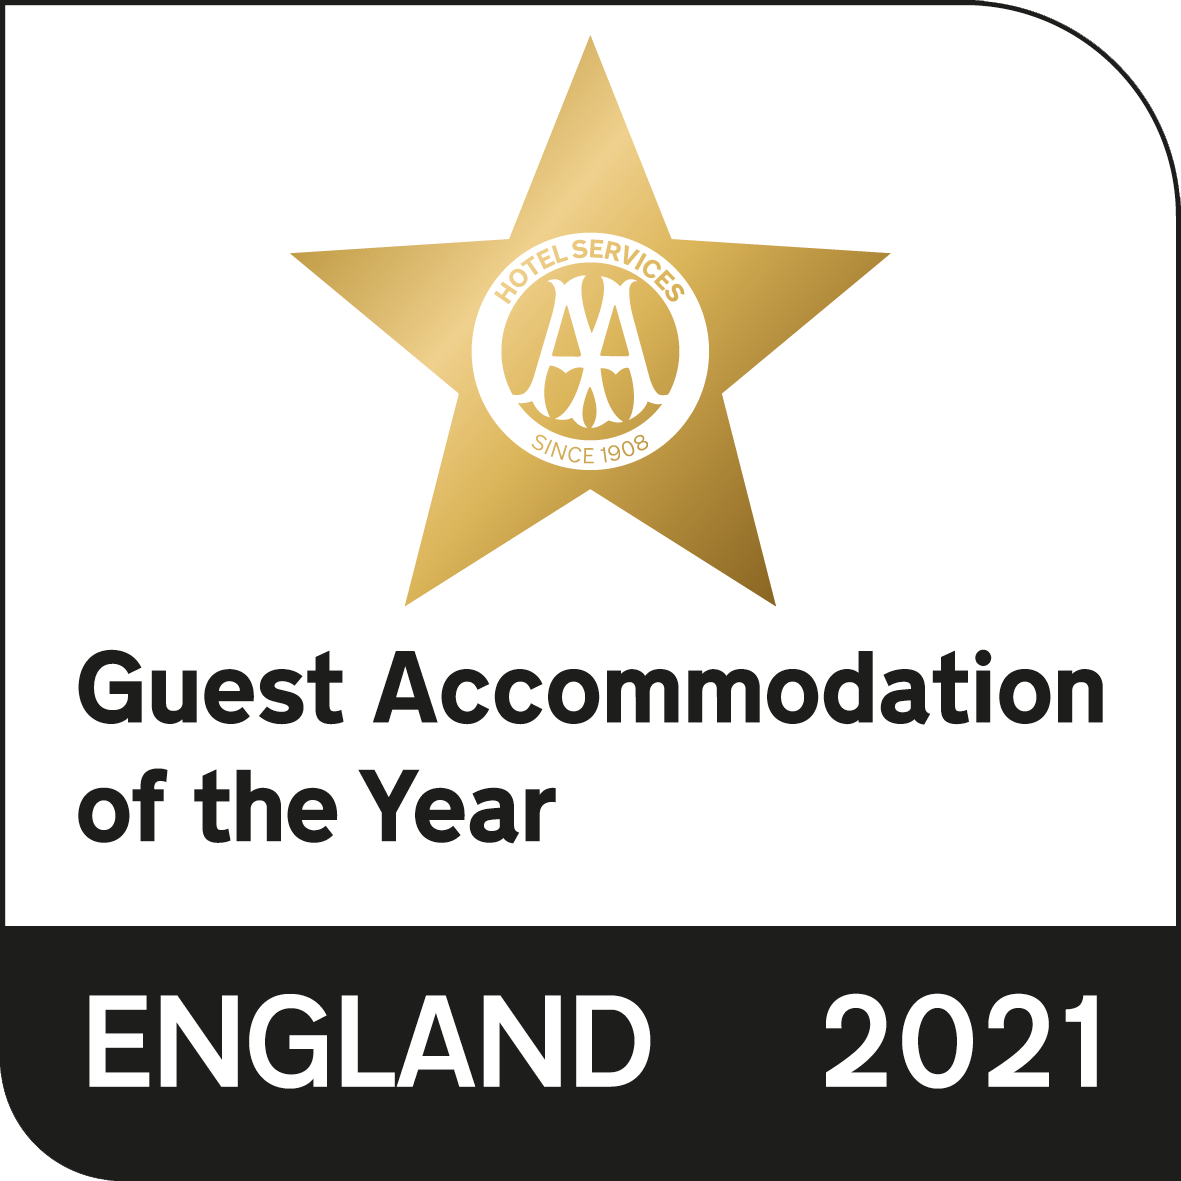 Guest Accommodation of the Year for England 